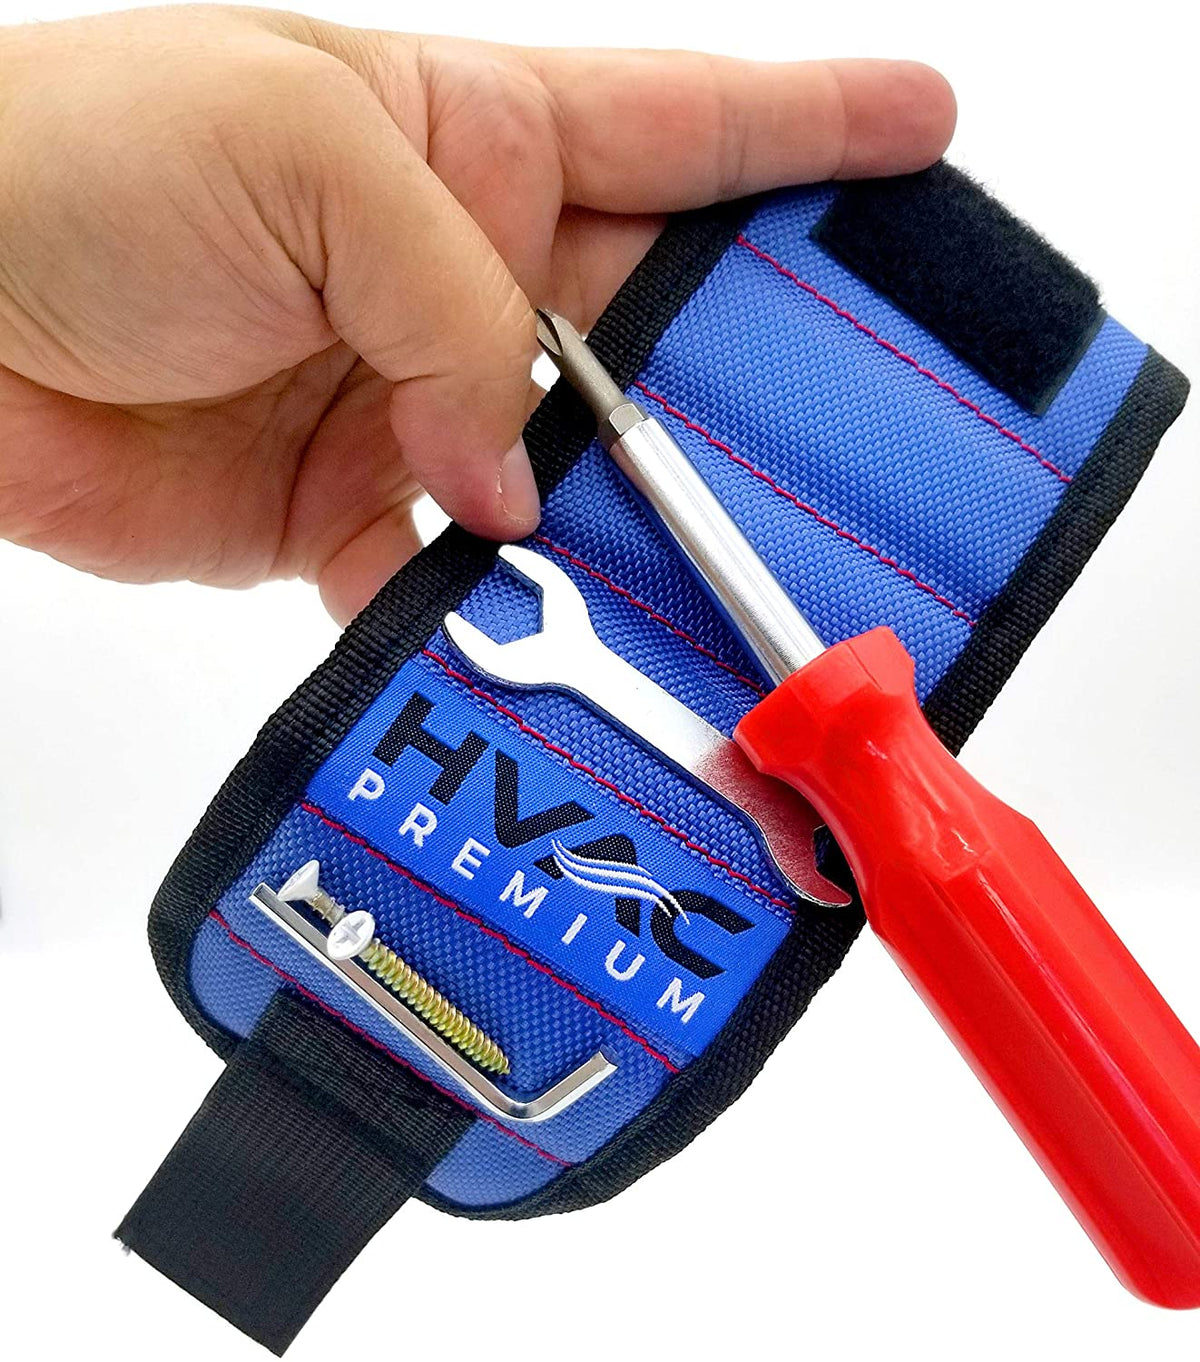 magnetic wristband for screws and tools for repairman